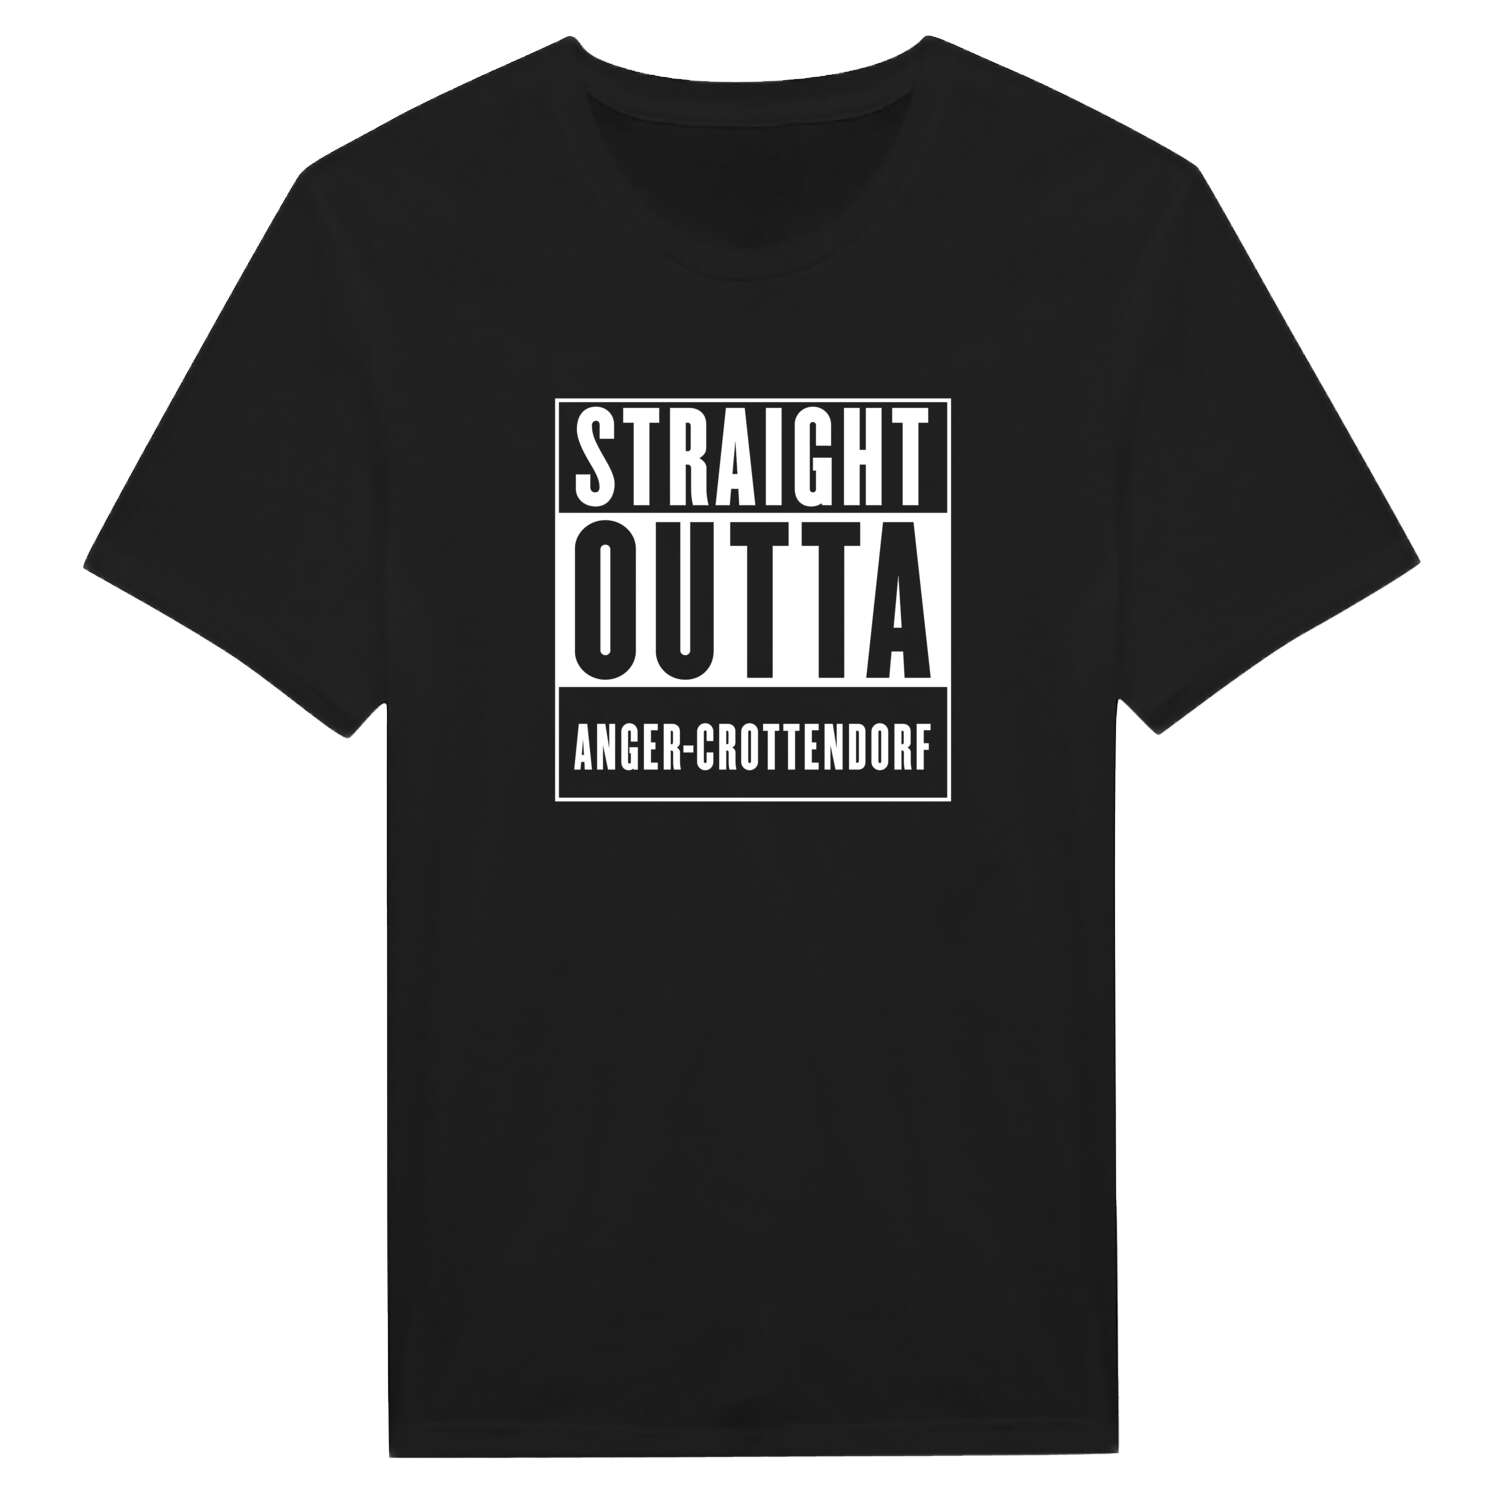 Anger-Crottendorf T-Shirt »Straight Outta«